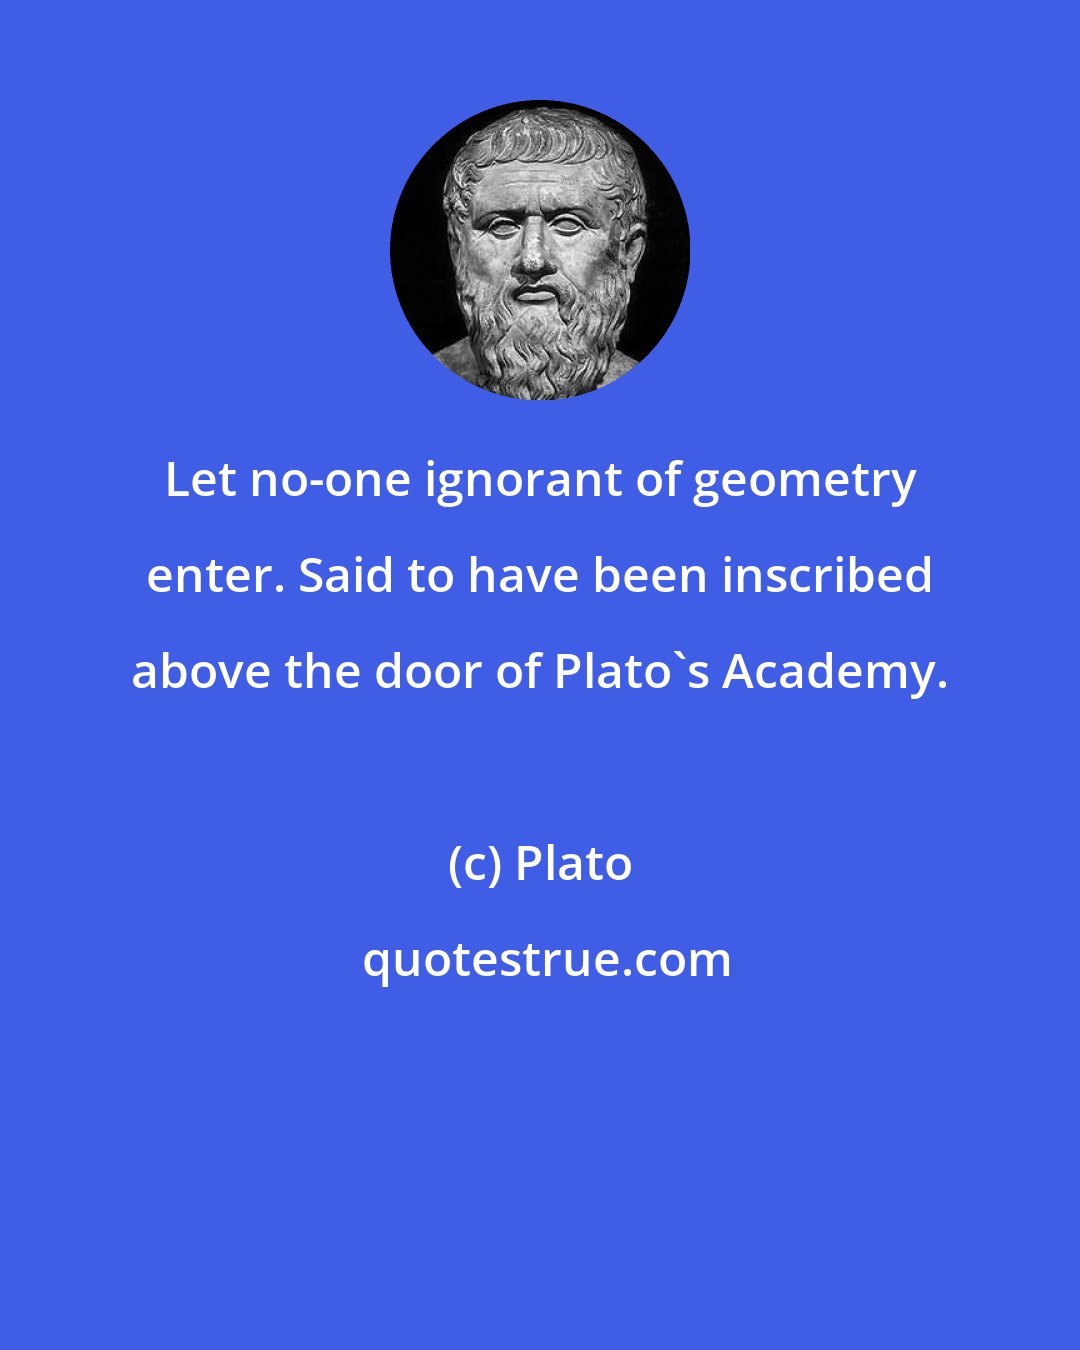 Plato: Let no-one ignorant of geometry enter. Said to have been inscribed above the door of Plato's Academy.